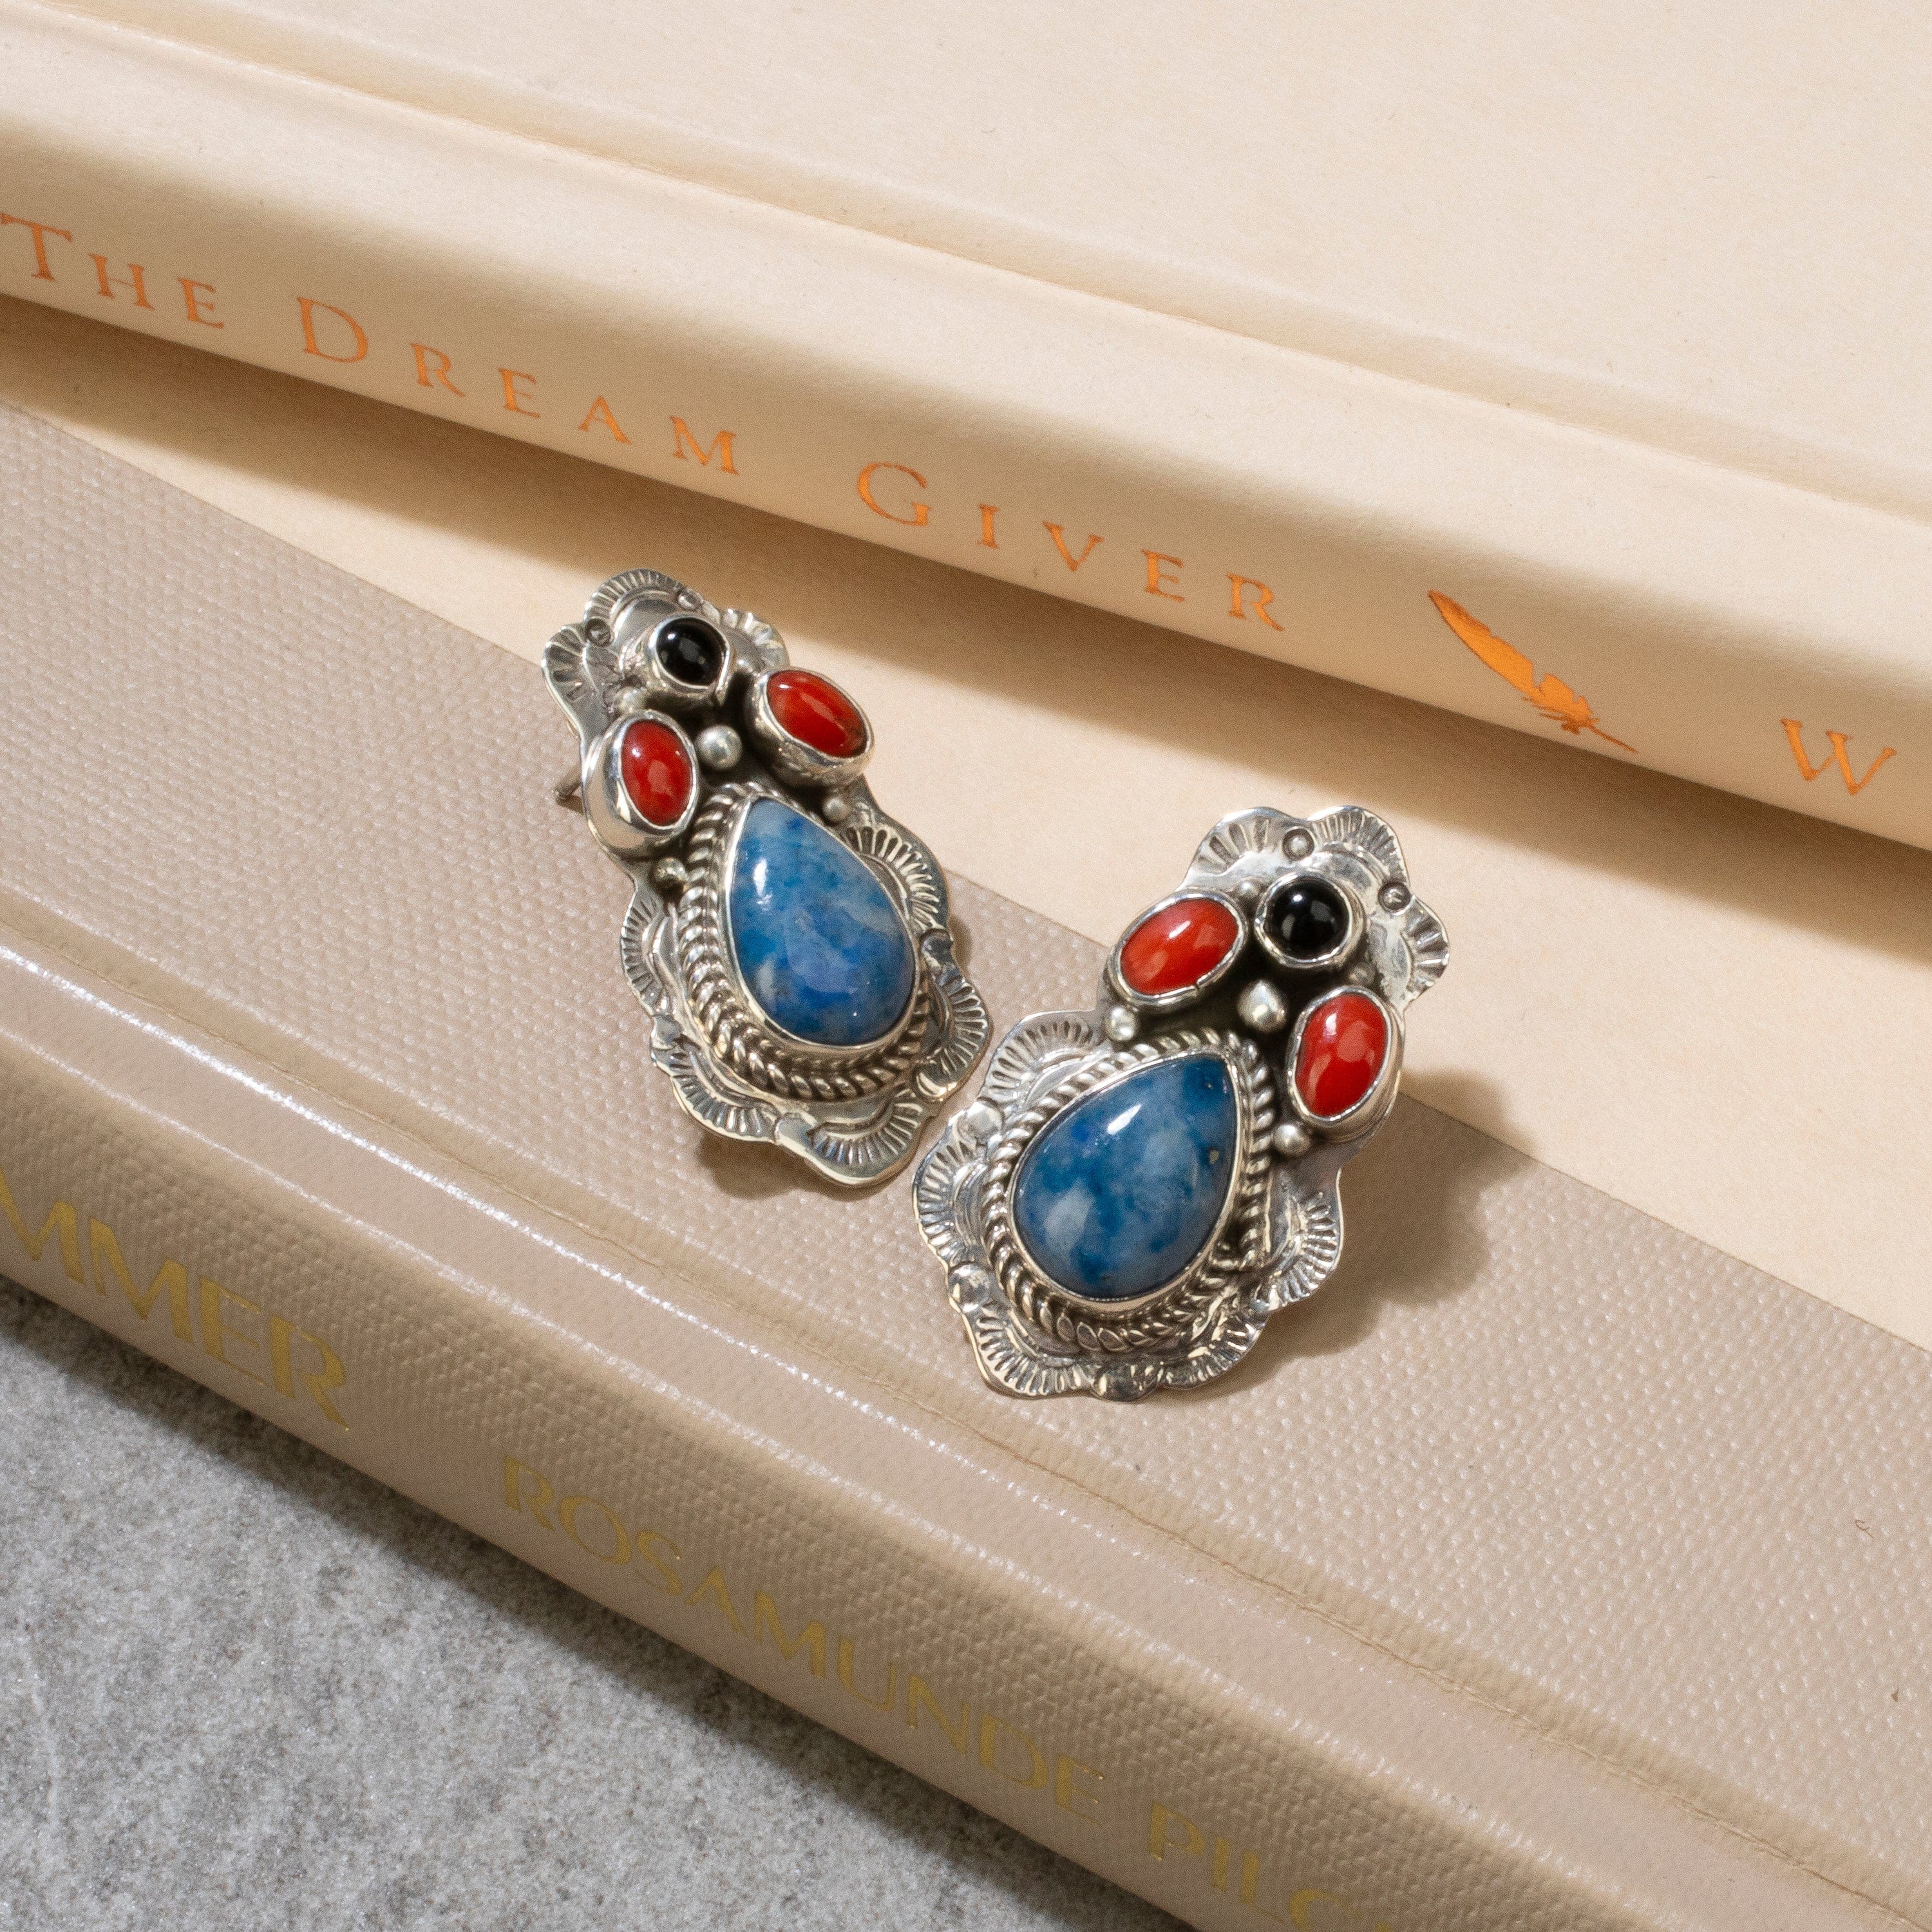 Kalifano Native American Jewelry Lapis, Red Coral, & Black Onyx Navajo USA Native American Made 925 Sterling Silver Earrings with Stud Backing NAE500.011